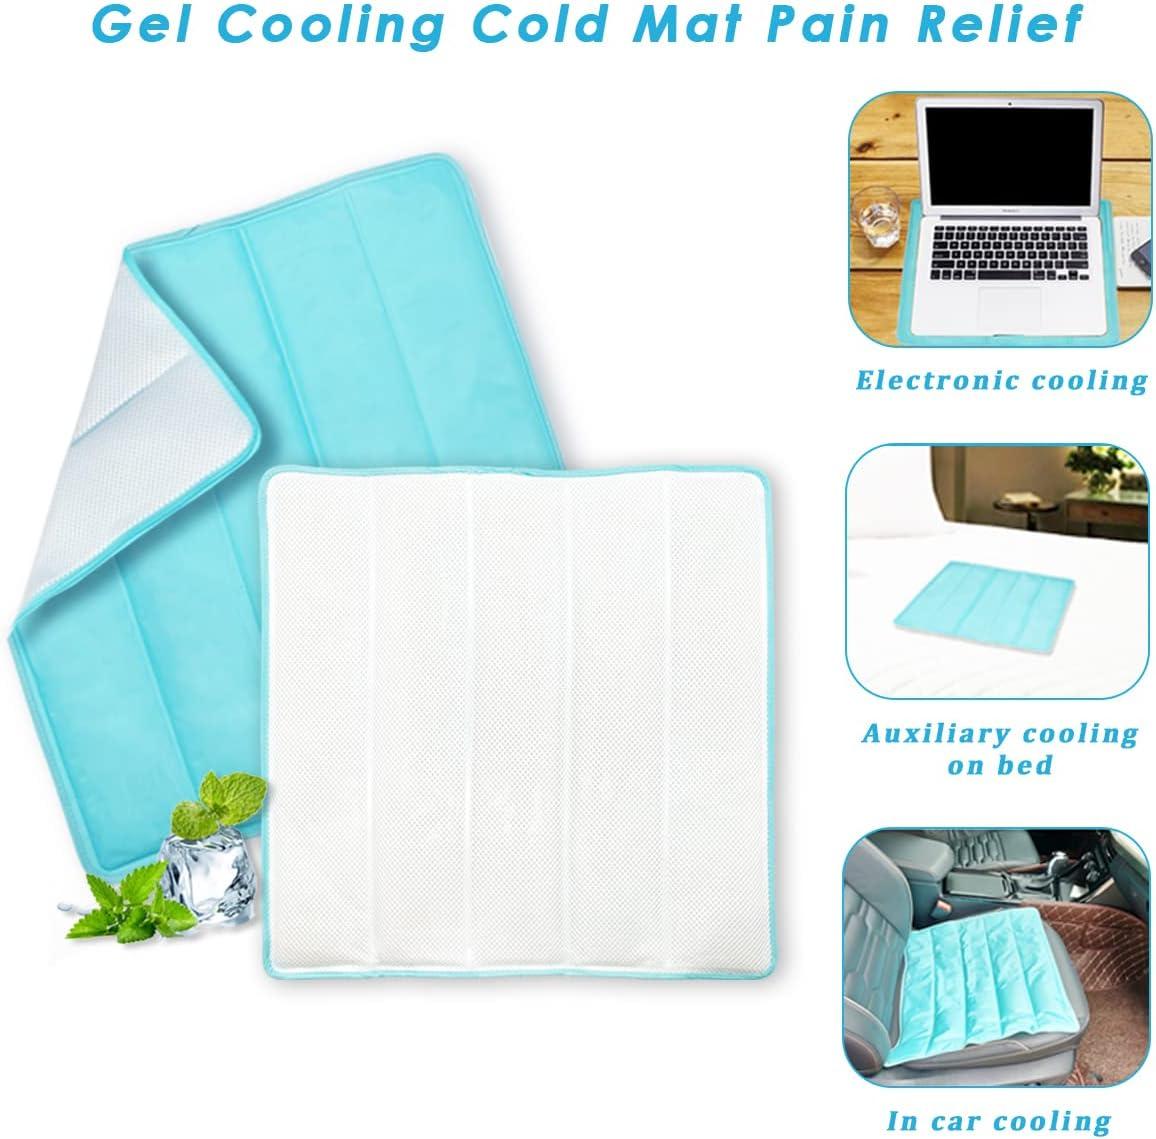 Ice Cooling Mat Gel Cooling Cold Mat Pain Relief Injuries Mesh Fabric Hot  Cold Therapy Pack for Back Shoulder Knee Belly Green 18in 18in (Green)